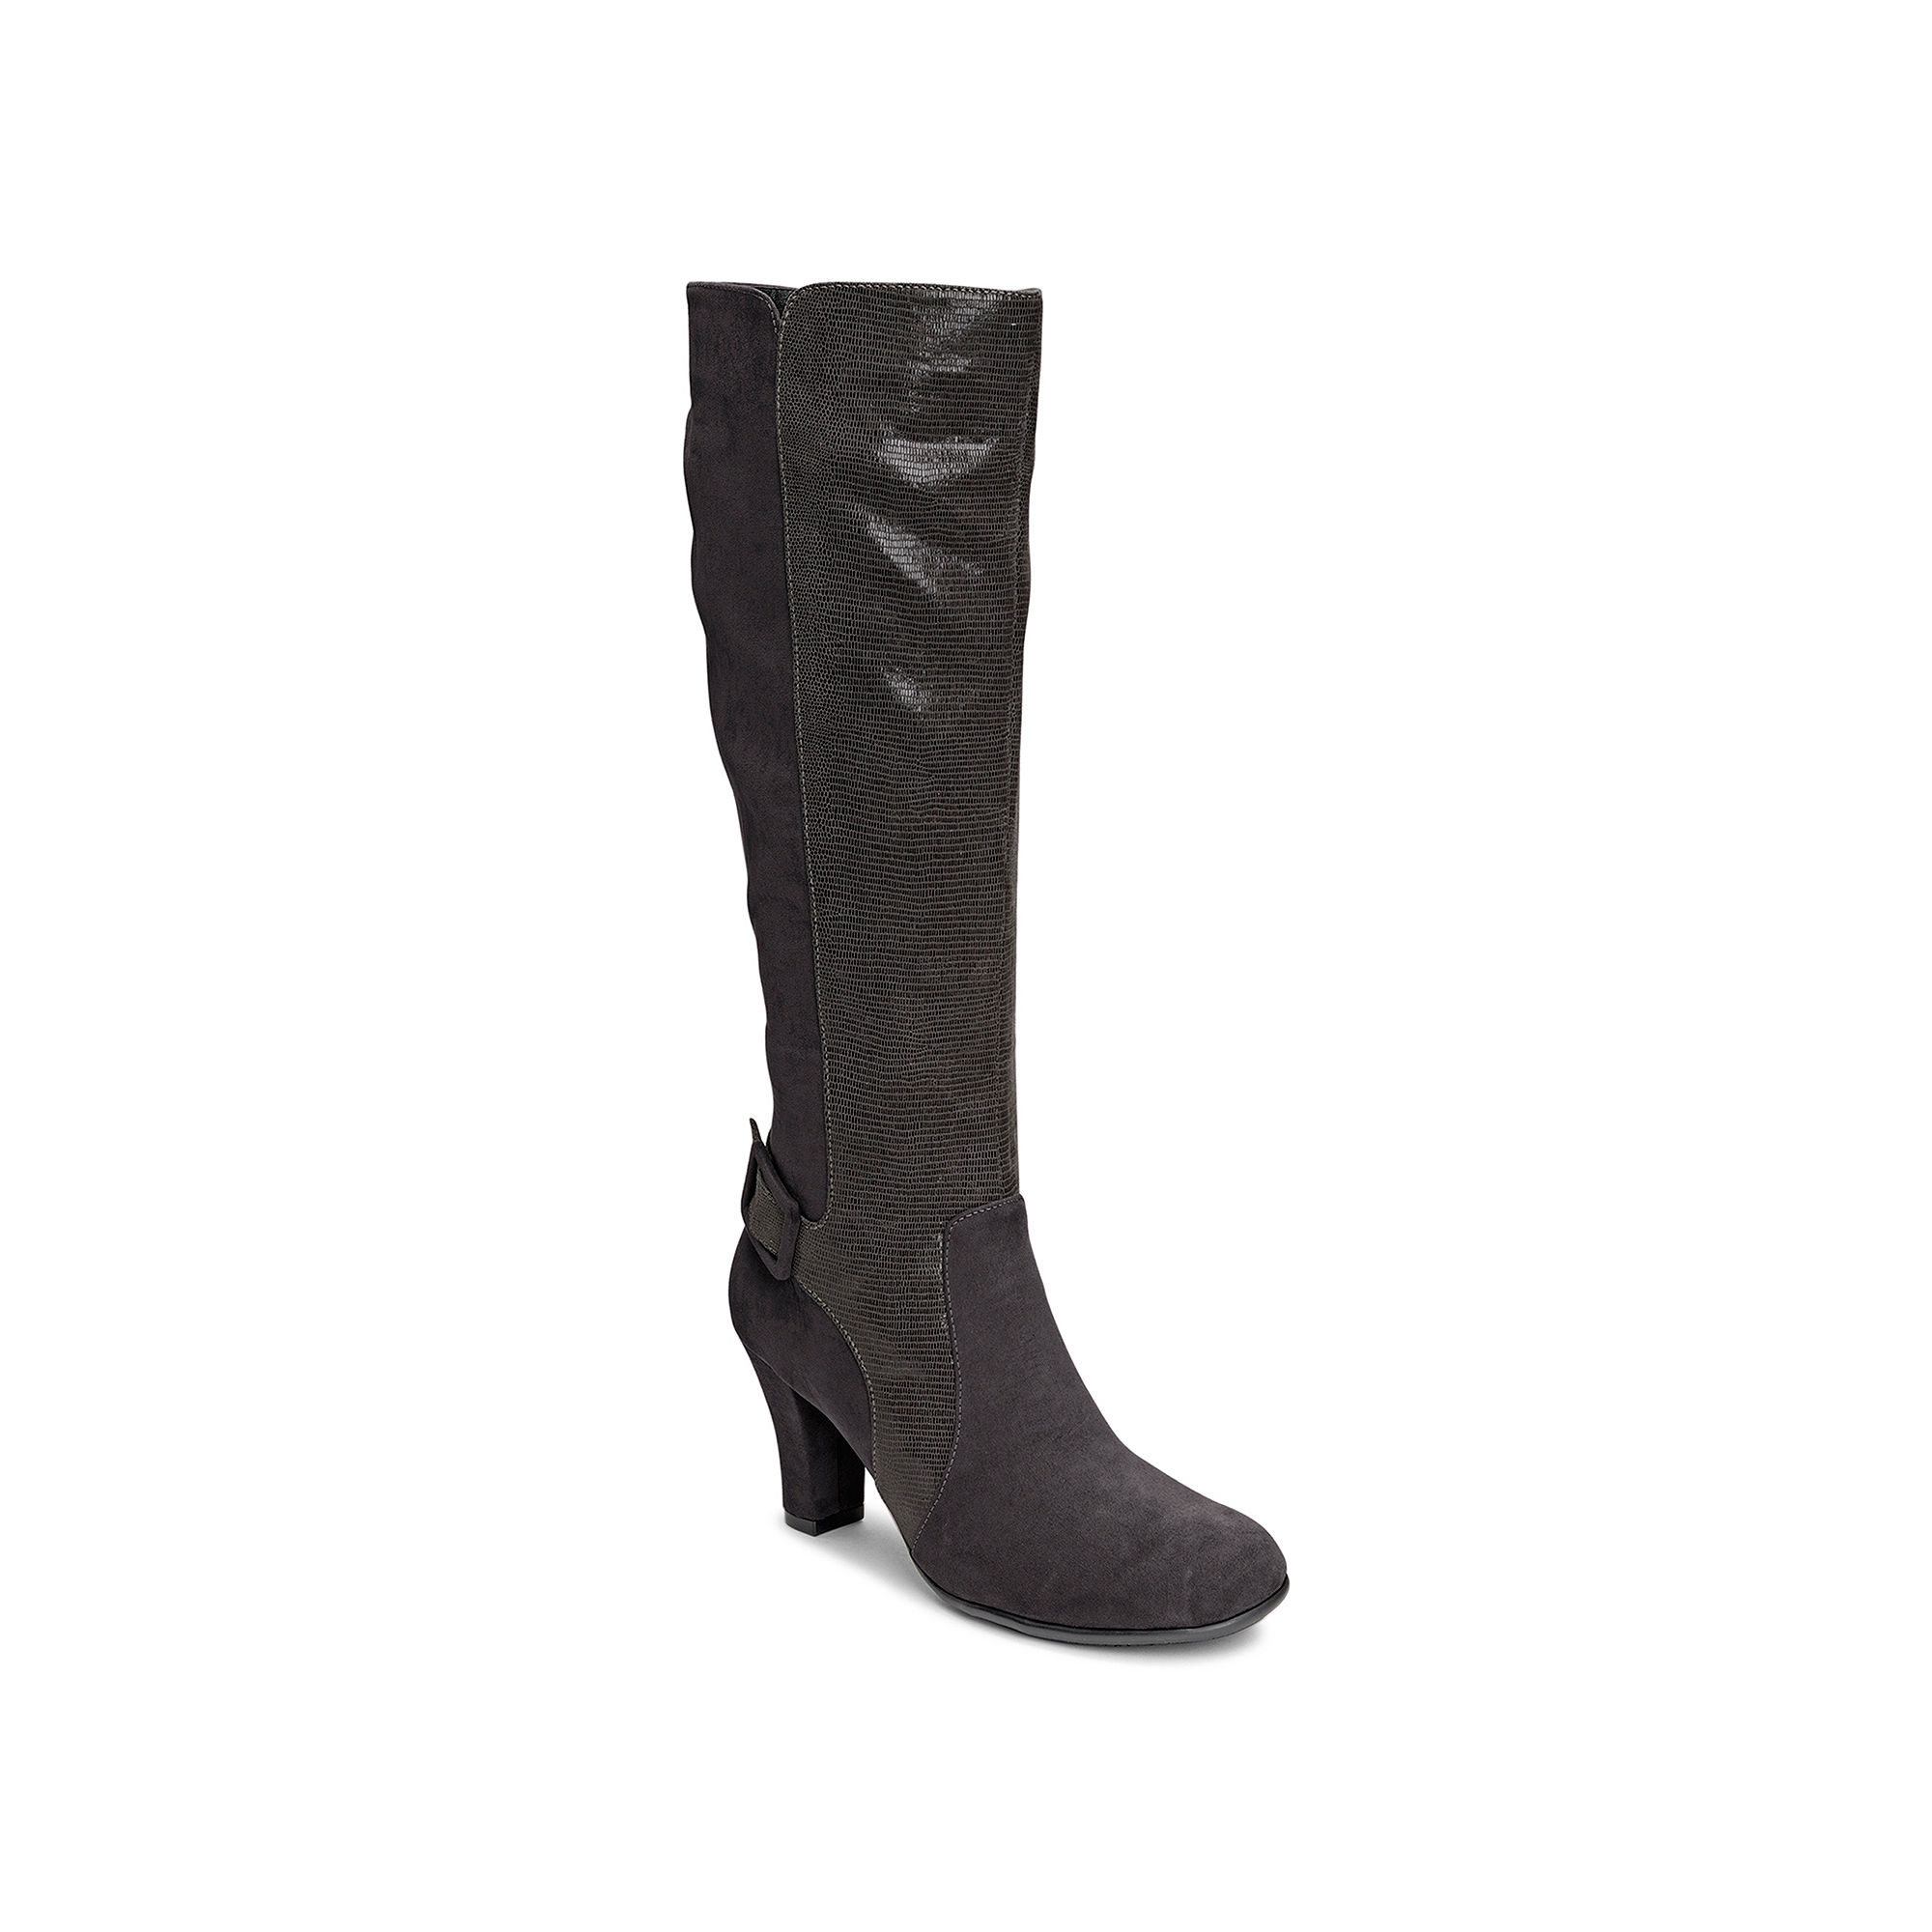 UPC 887740335575 product image for A2 by Aerosoles Money Role Knee-High Boots | upcitemdb.com